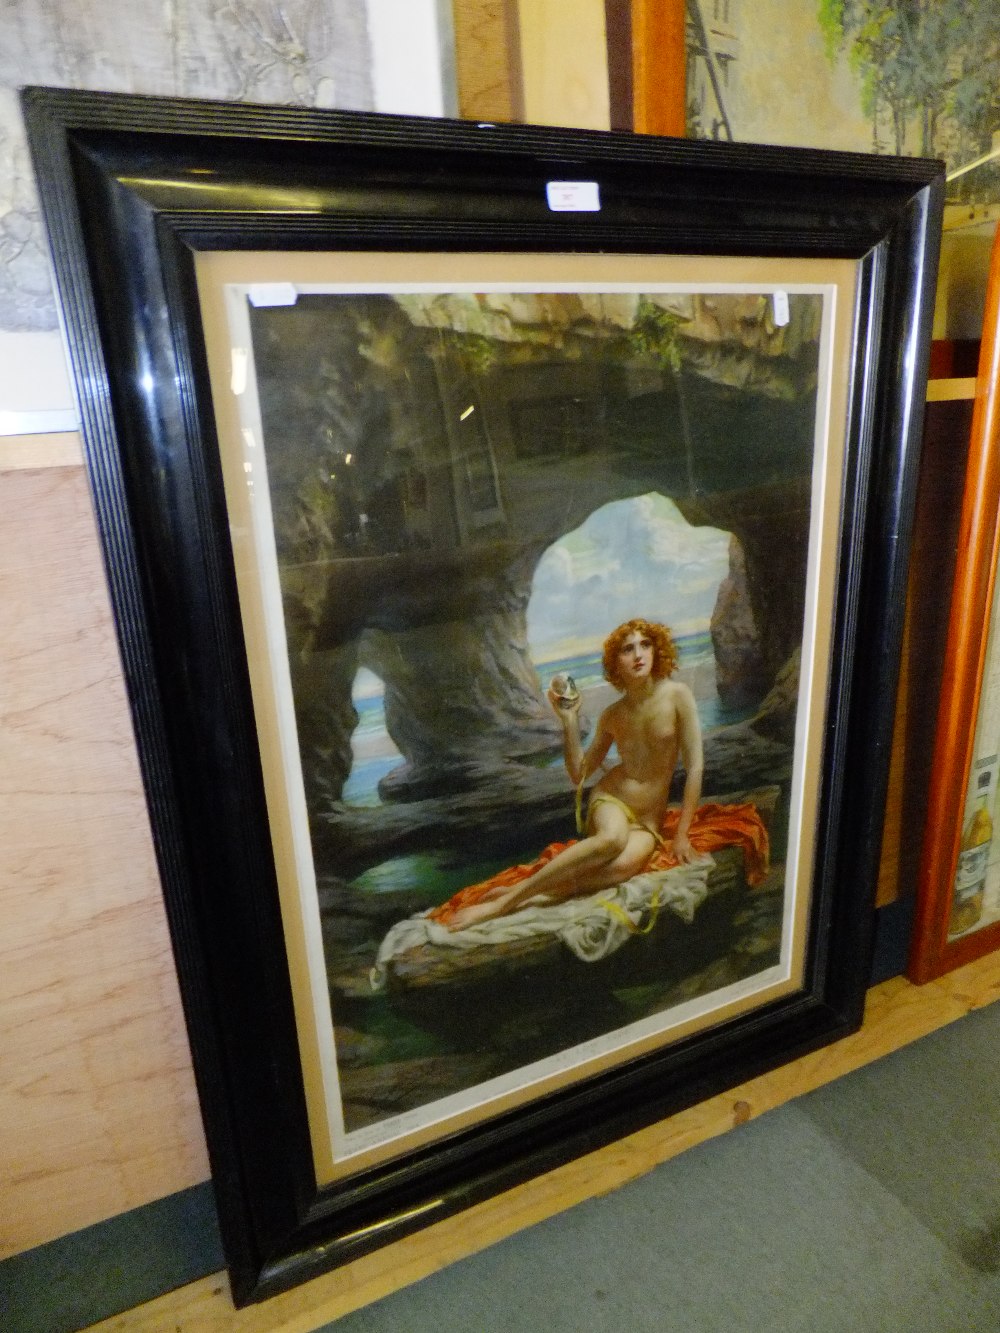 A vintage Pears soap annual print depicting a nude lady on a rock, mounted in a black frame 17" x